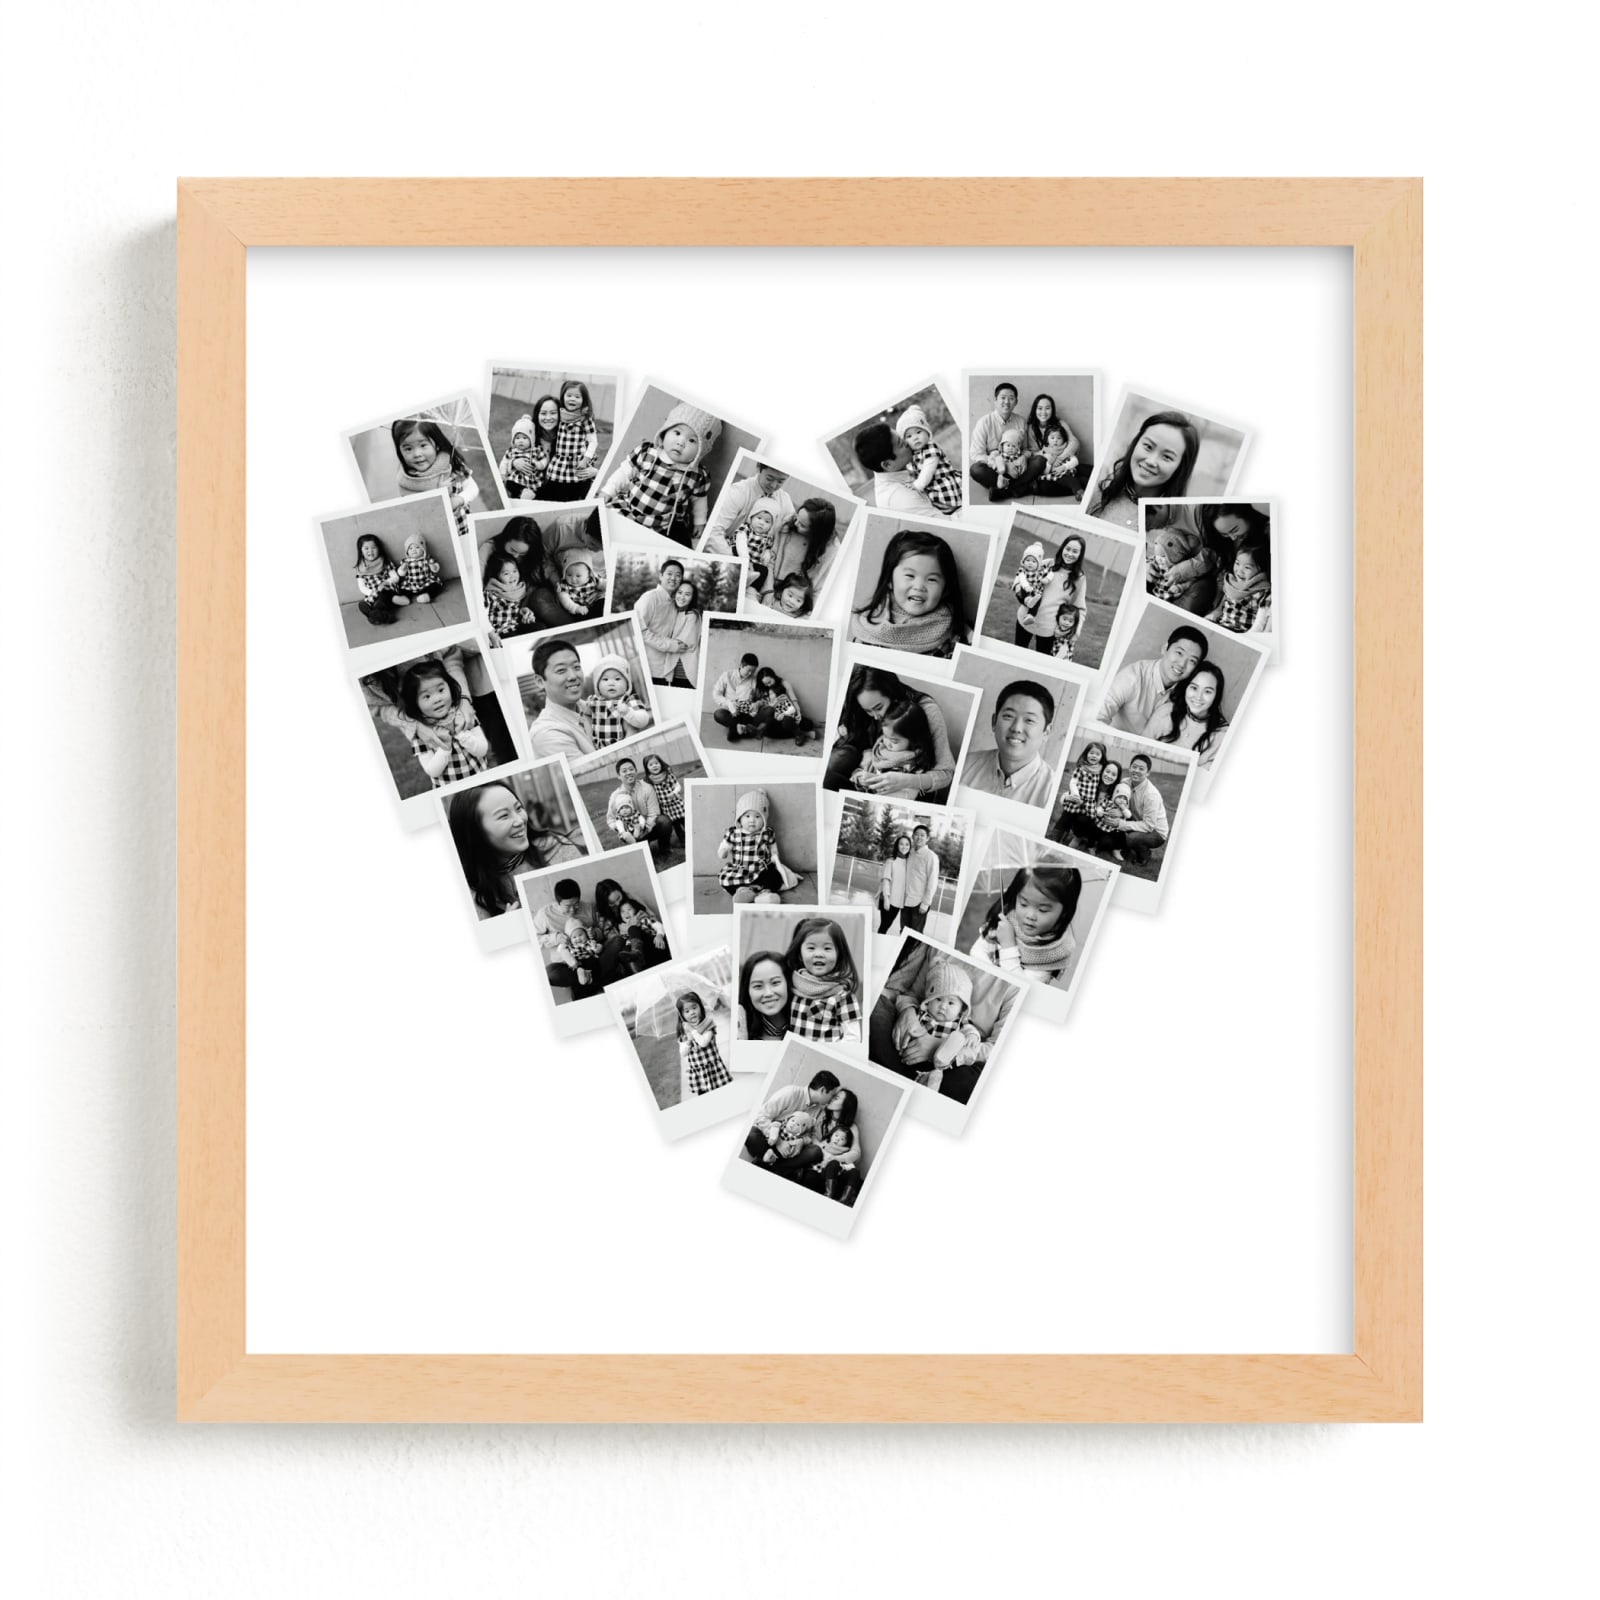 This is a black photo art by Minted called Filter Heart Snapshot Mix® Photo Art.